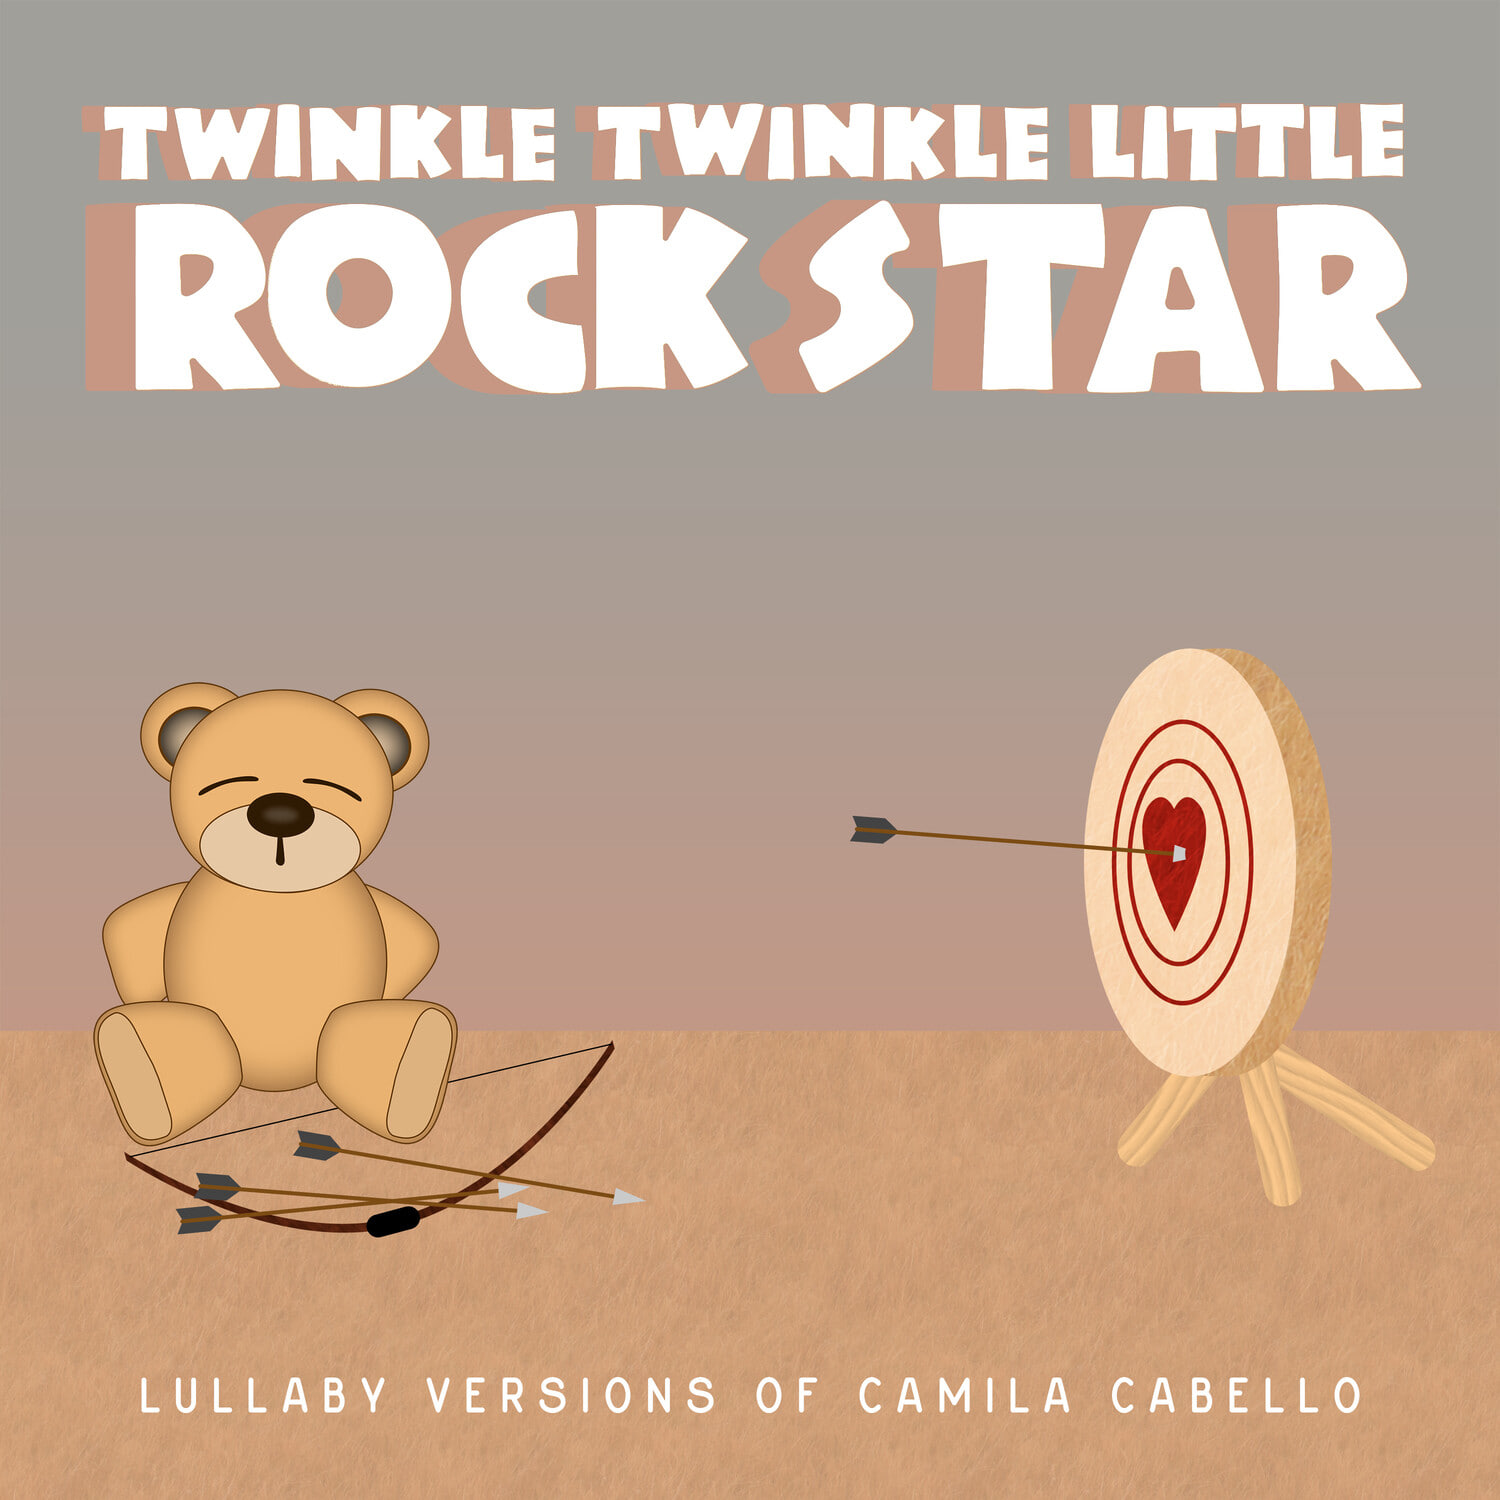 Twinkle Twinkle Little Rock Star-I Know What You Did Last Summer